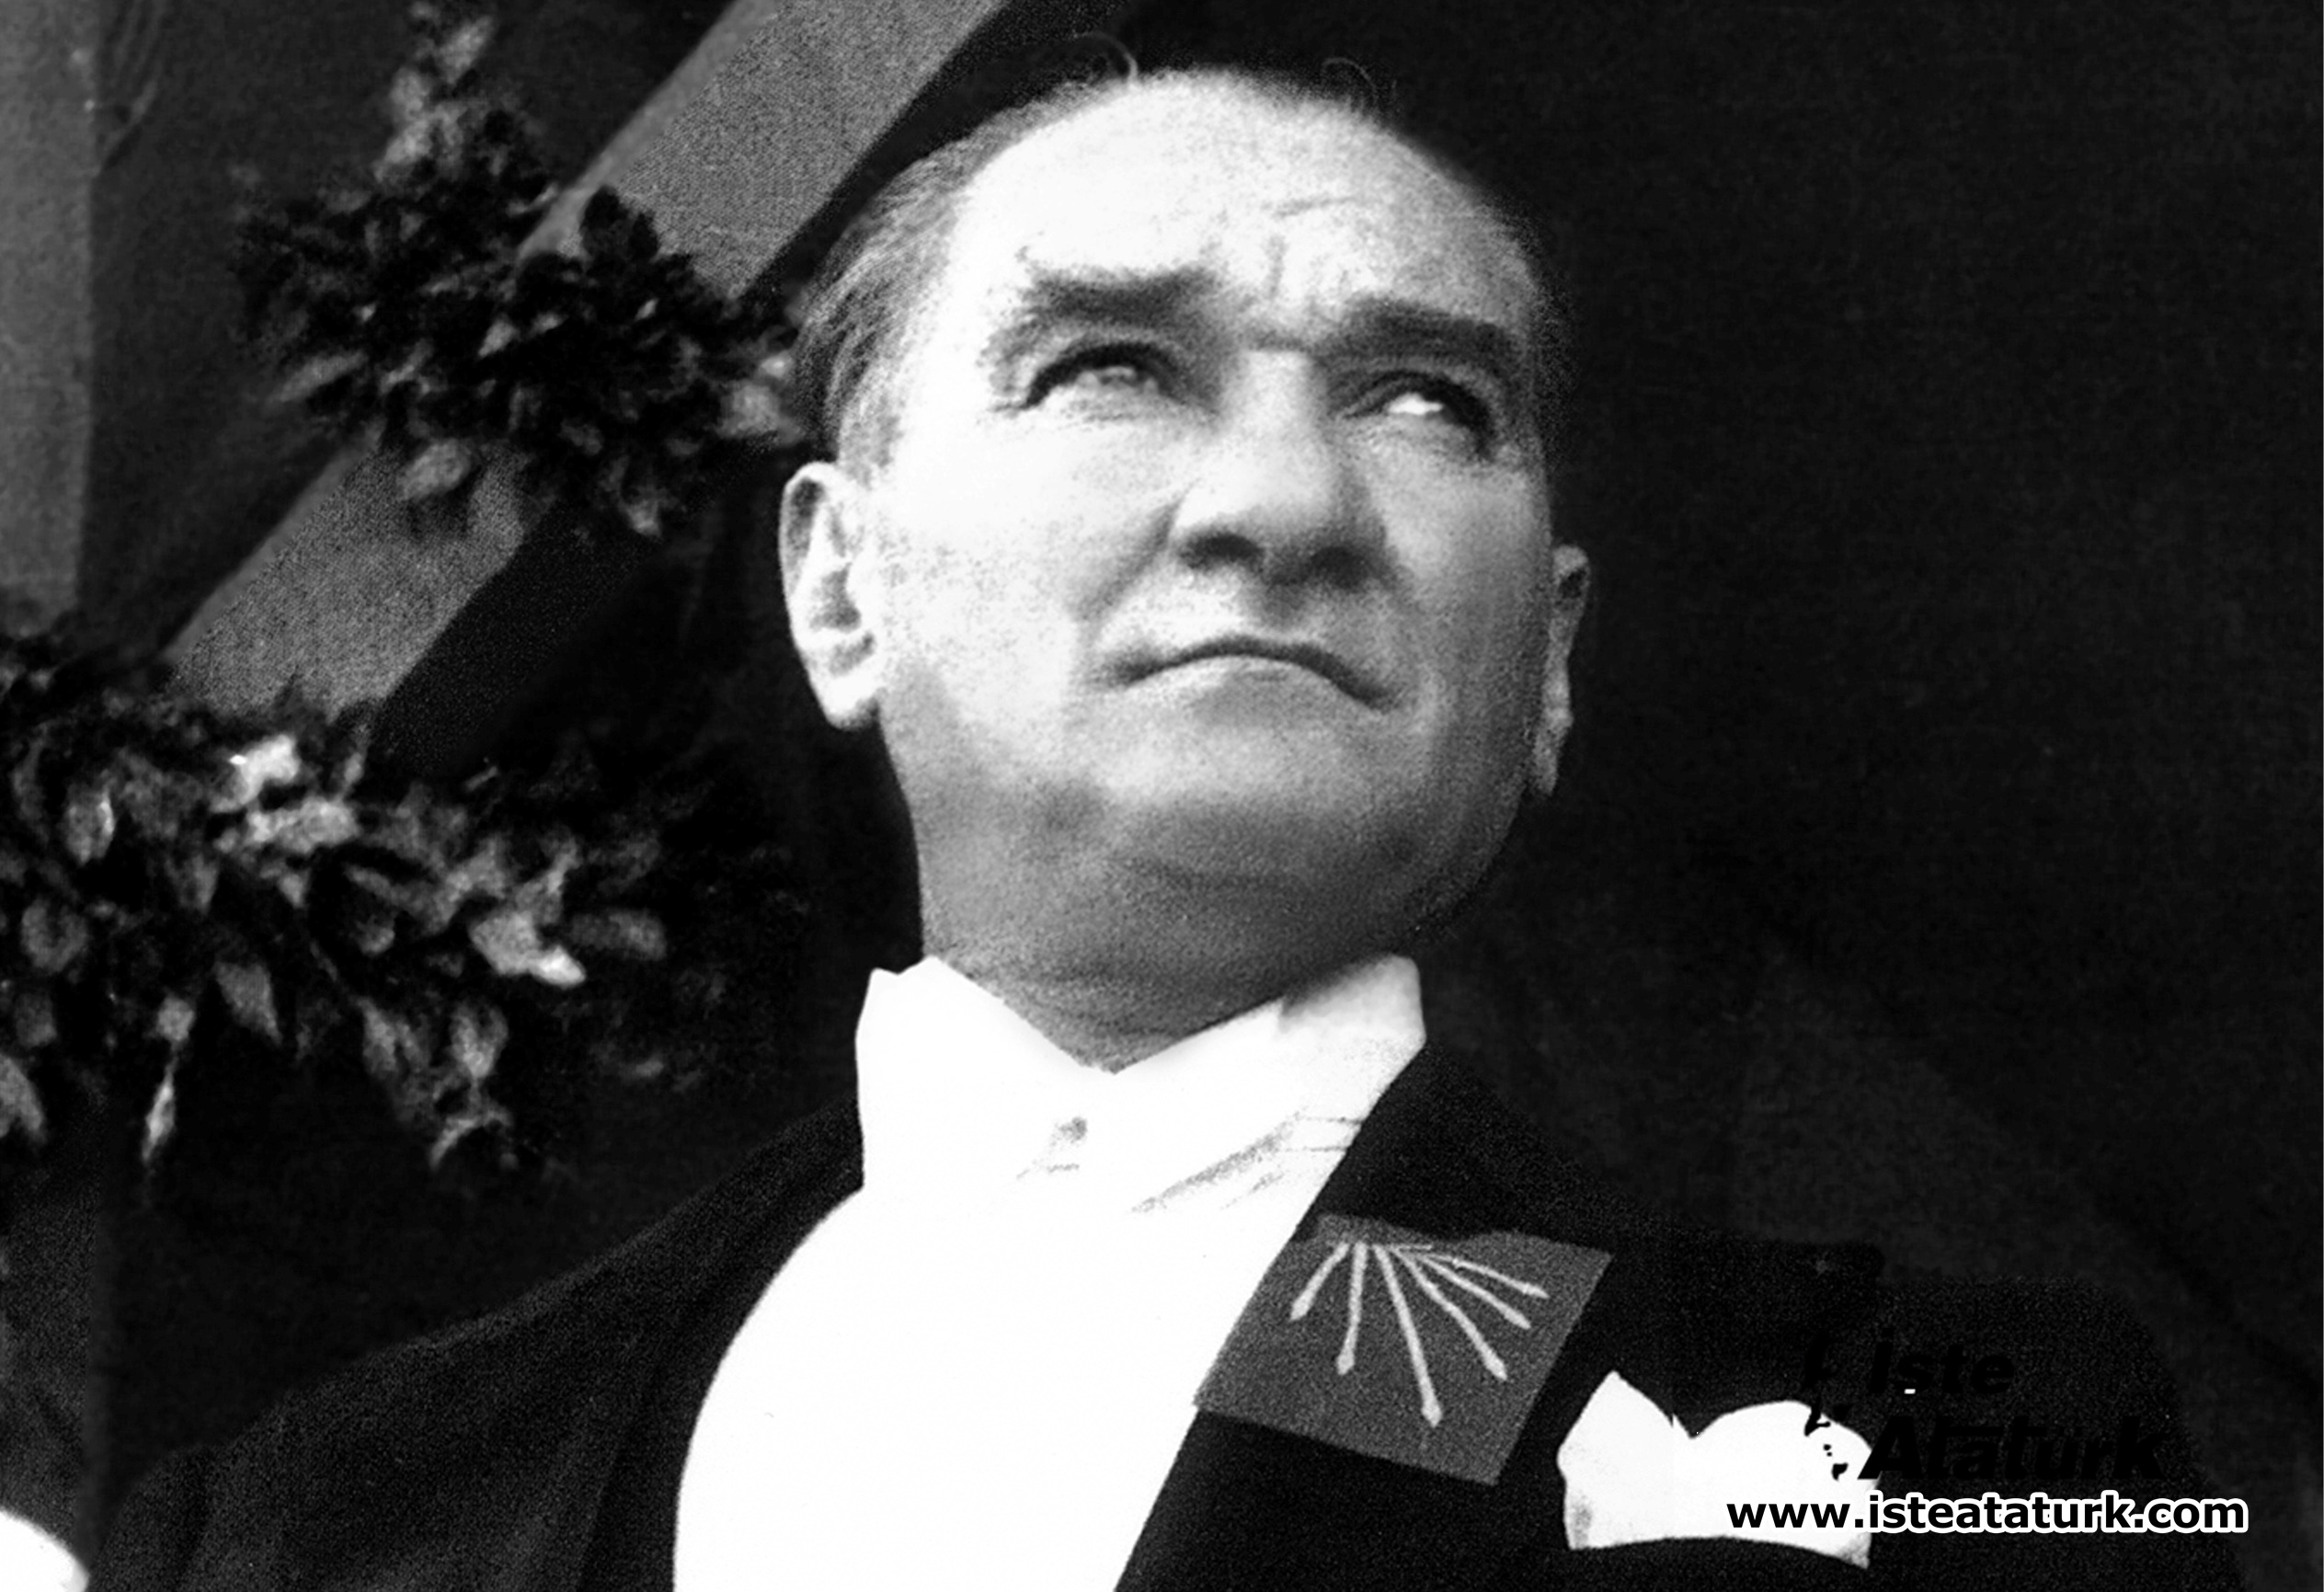 Atatürk's Principles and Other Trends